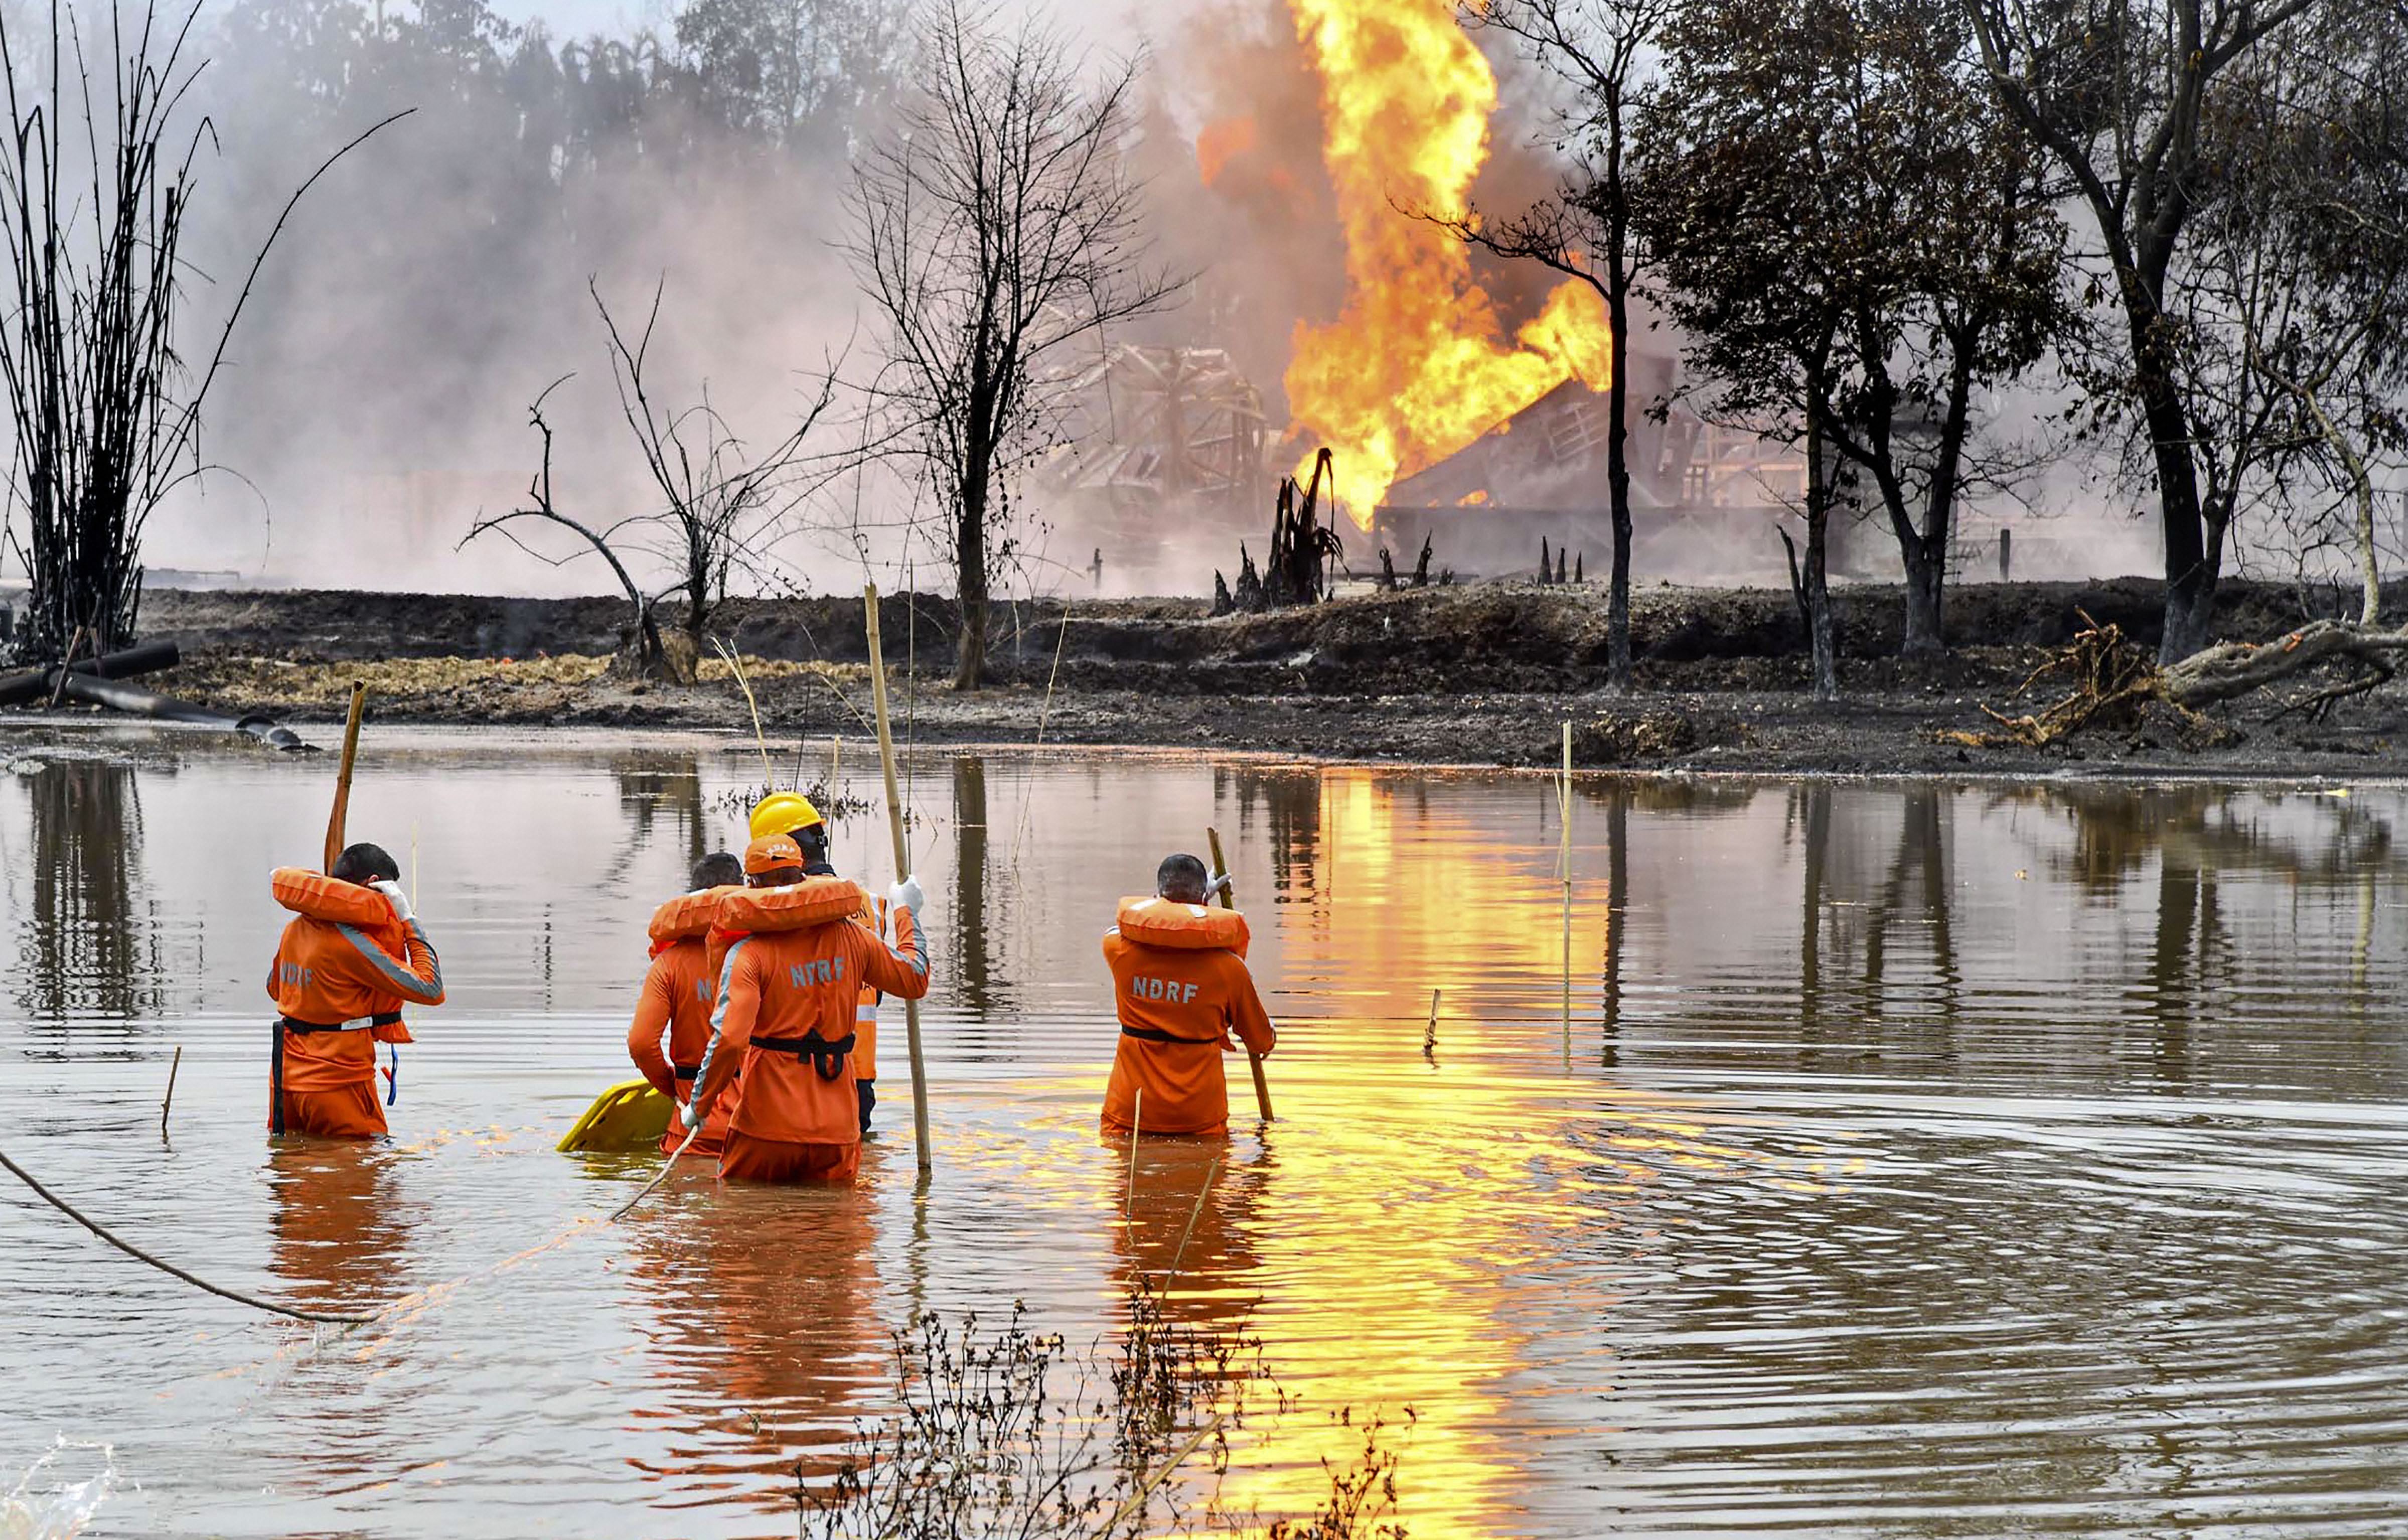 National Disaster Response Team personnel carry out search and rescue operations after two firemen of Oil India Limited went missing since an oil well at the company’s Baghjan oilfield exploded in Assam’s Tinsukia district on Wednesday, June 10, 2020. 